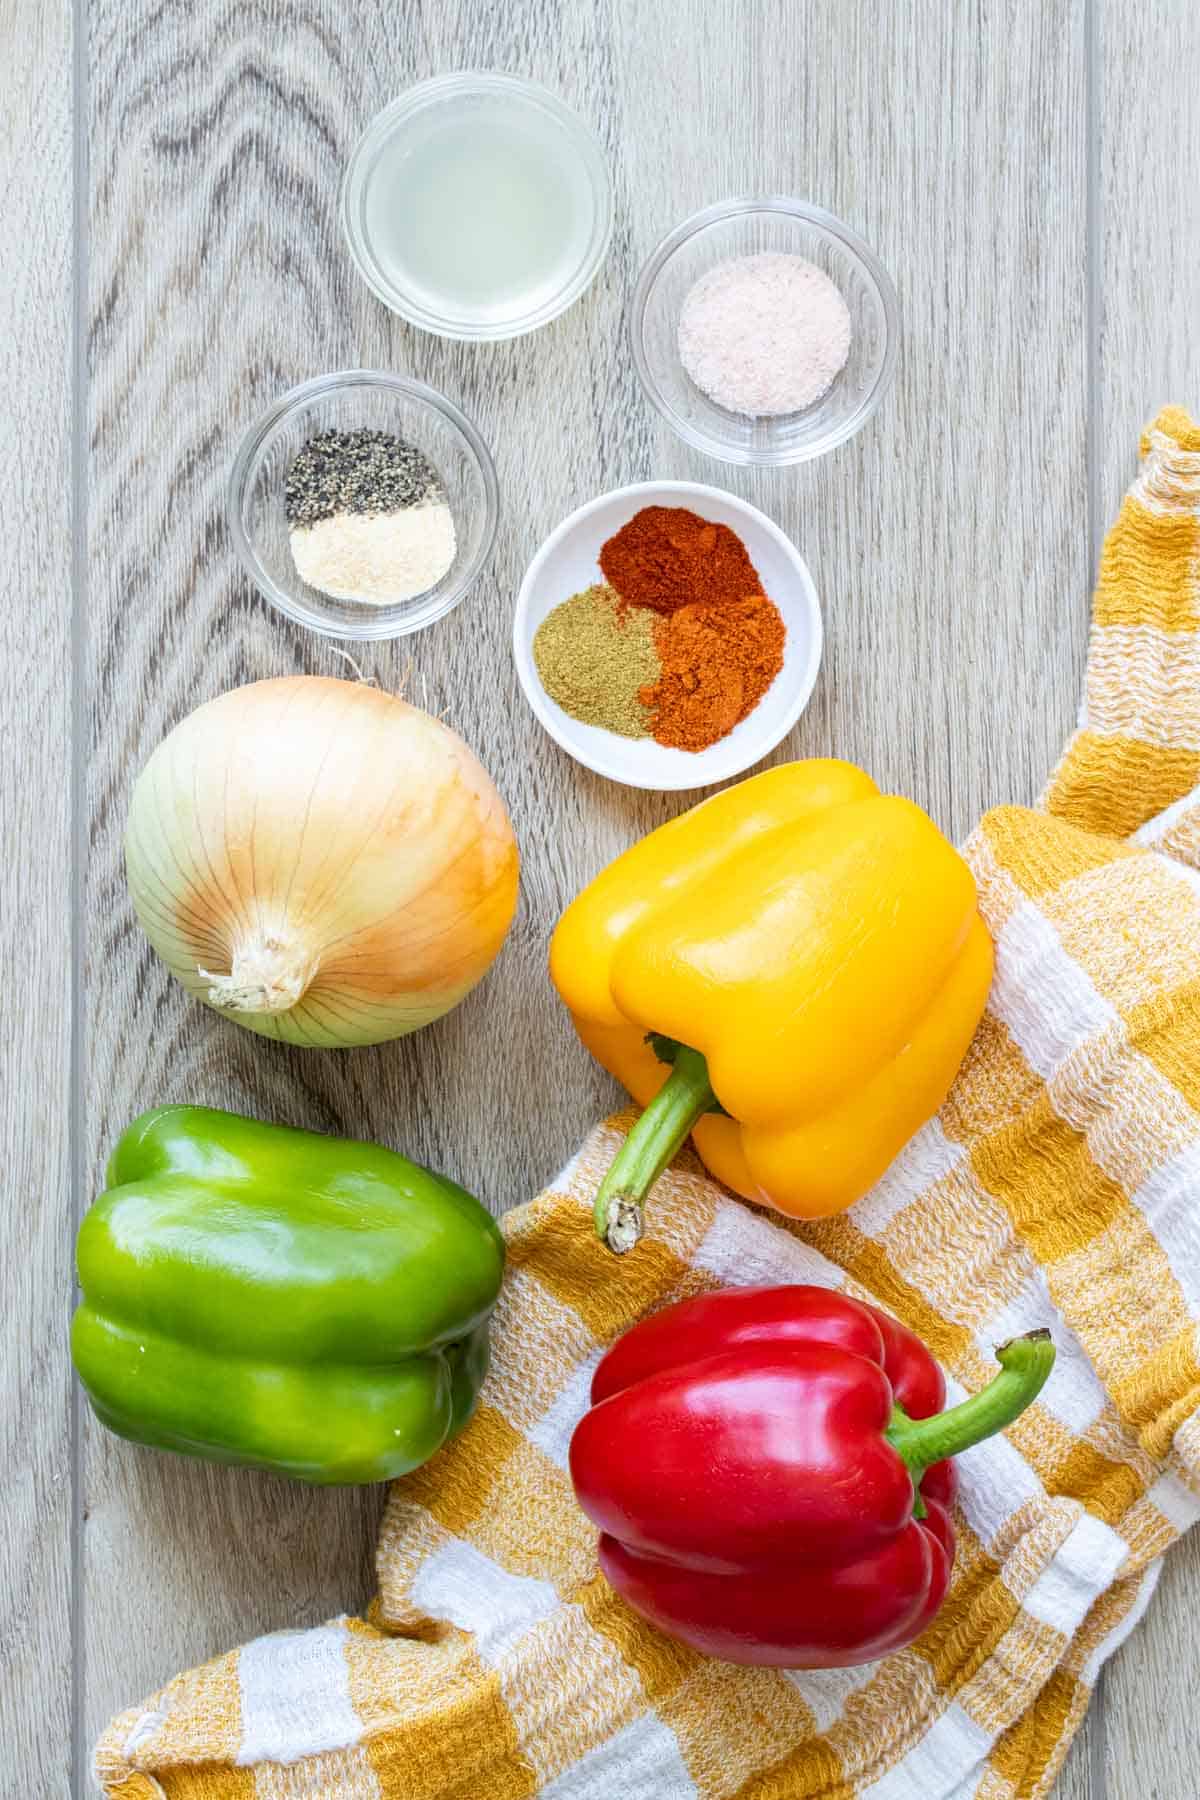 Ingredients needed to make Mexican spiced fajita veggies on a wooden surface